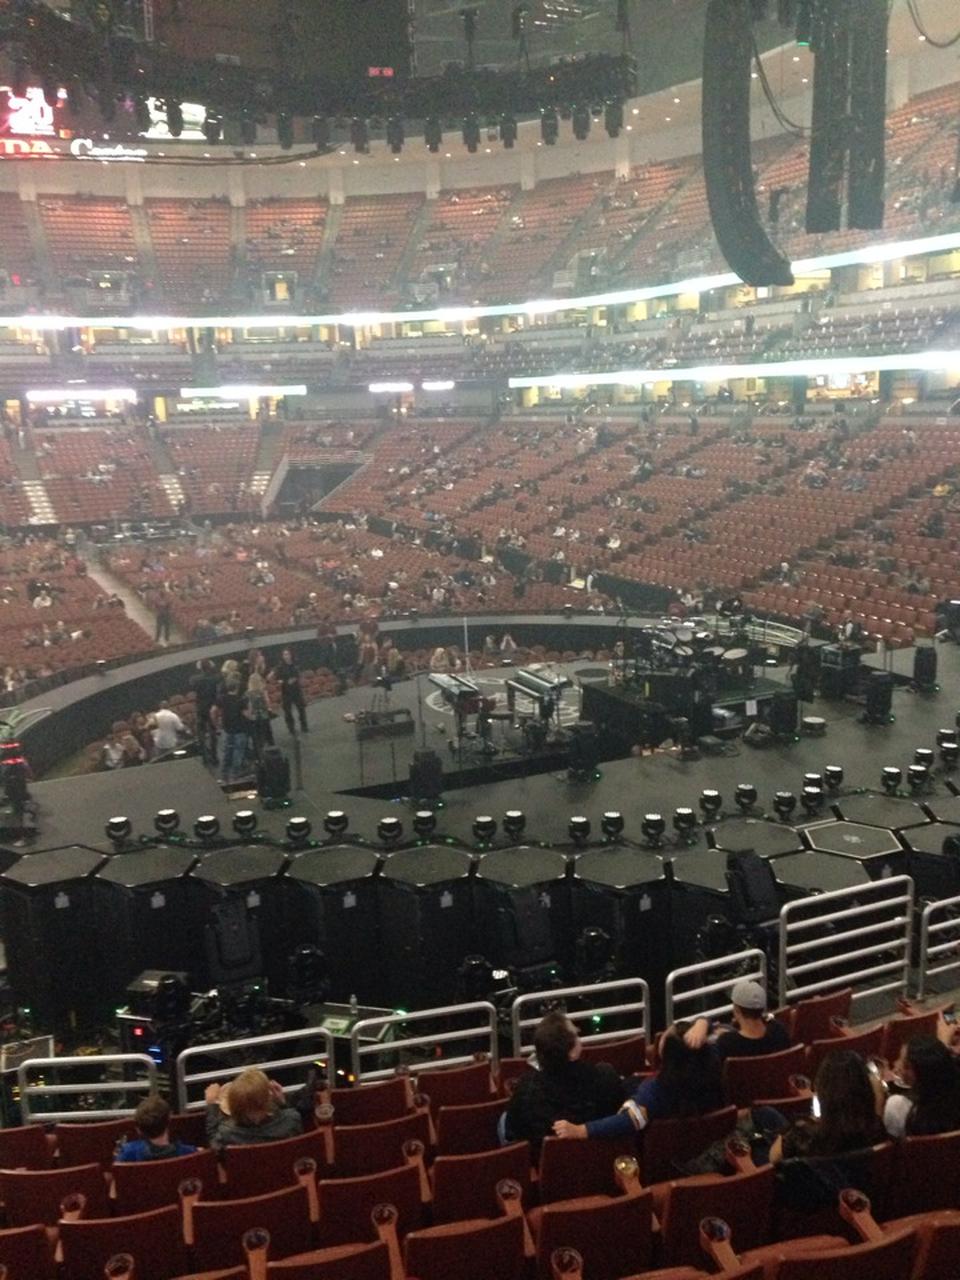 section 216 seat view  for concert - honda center